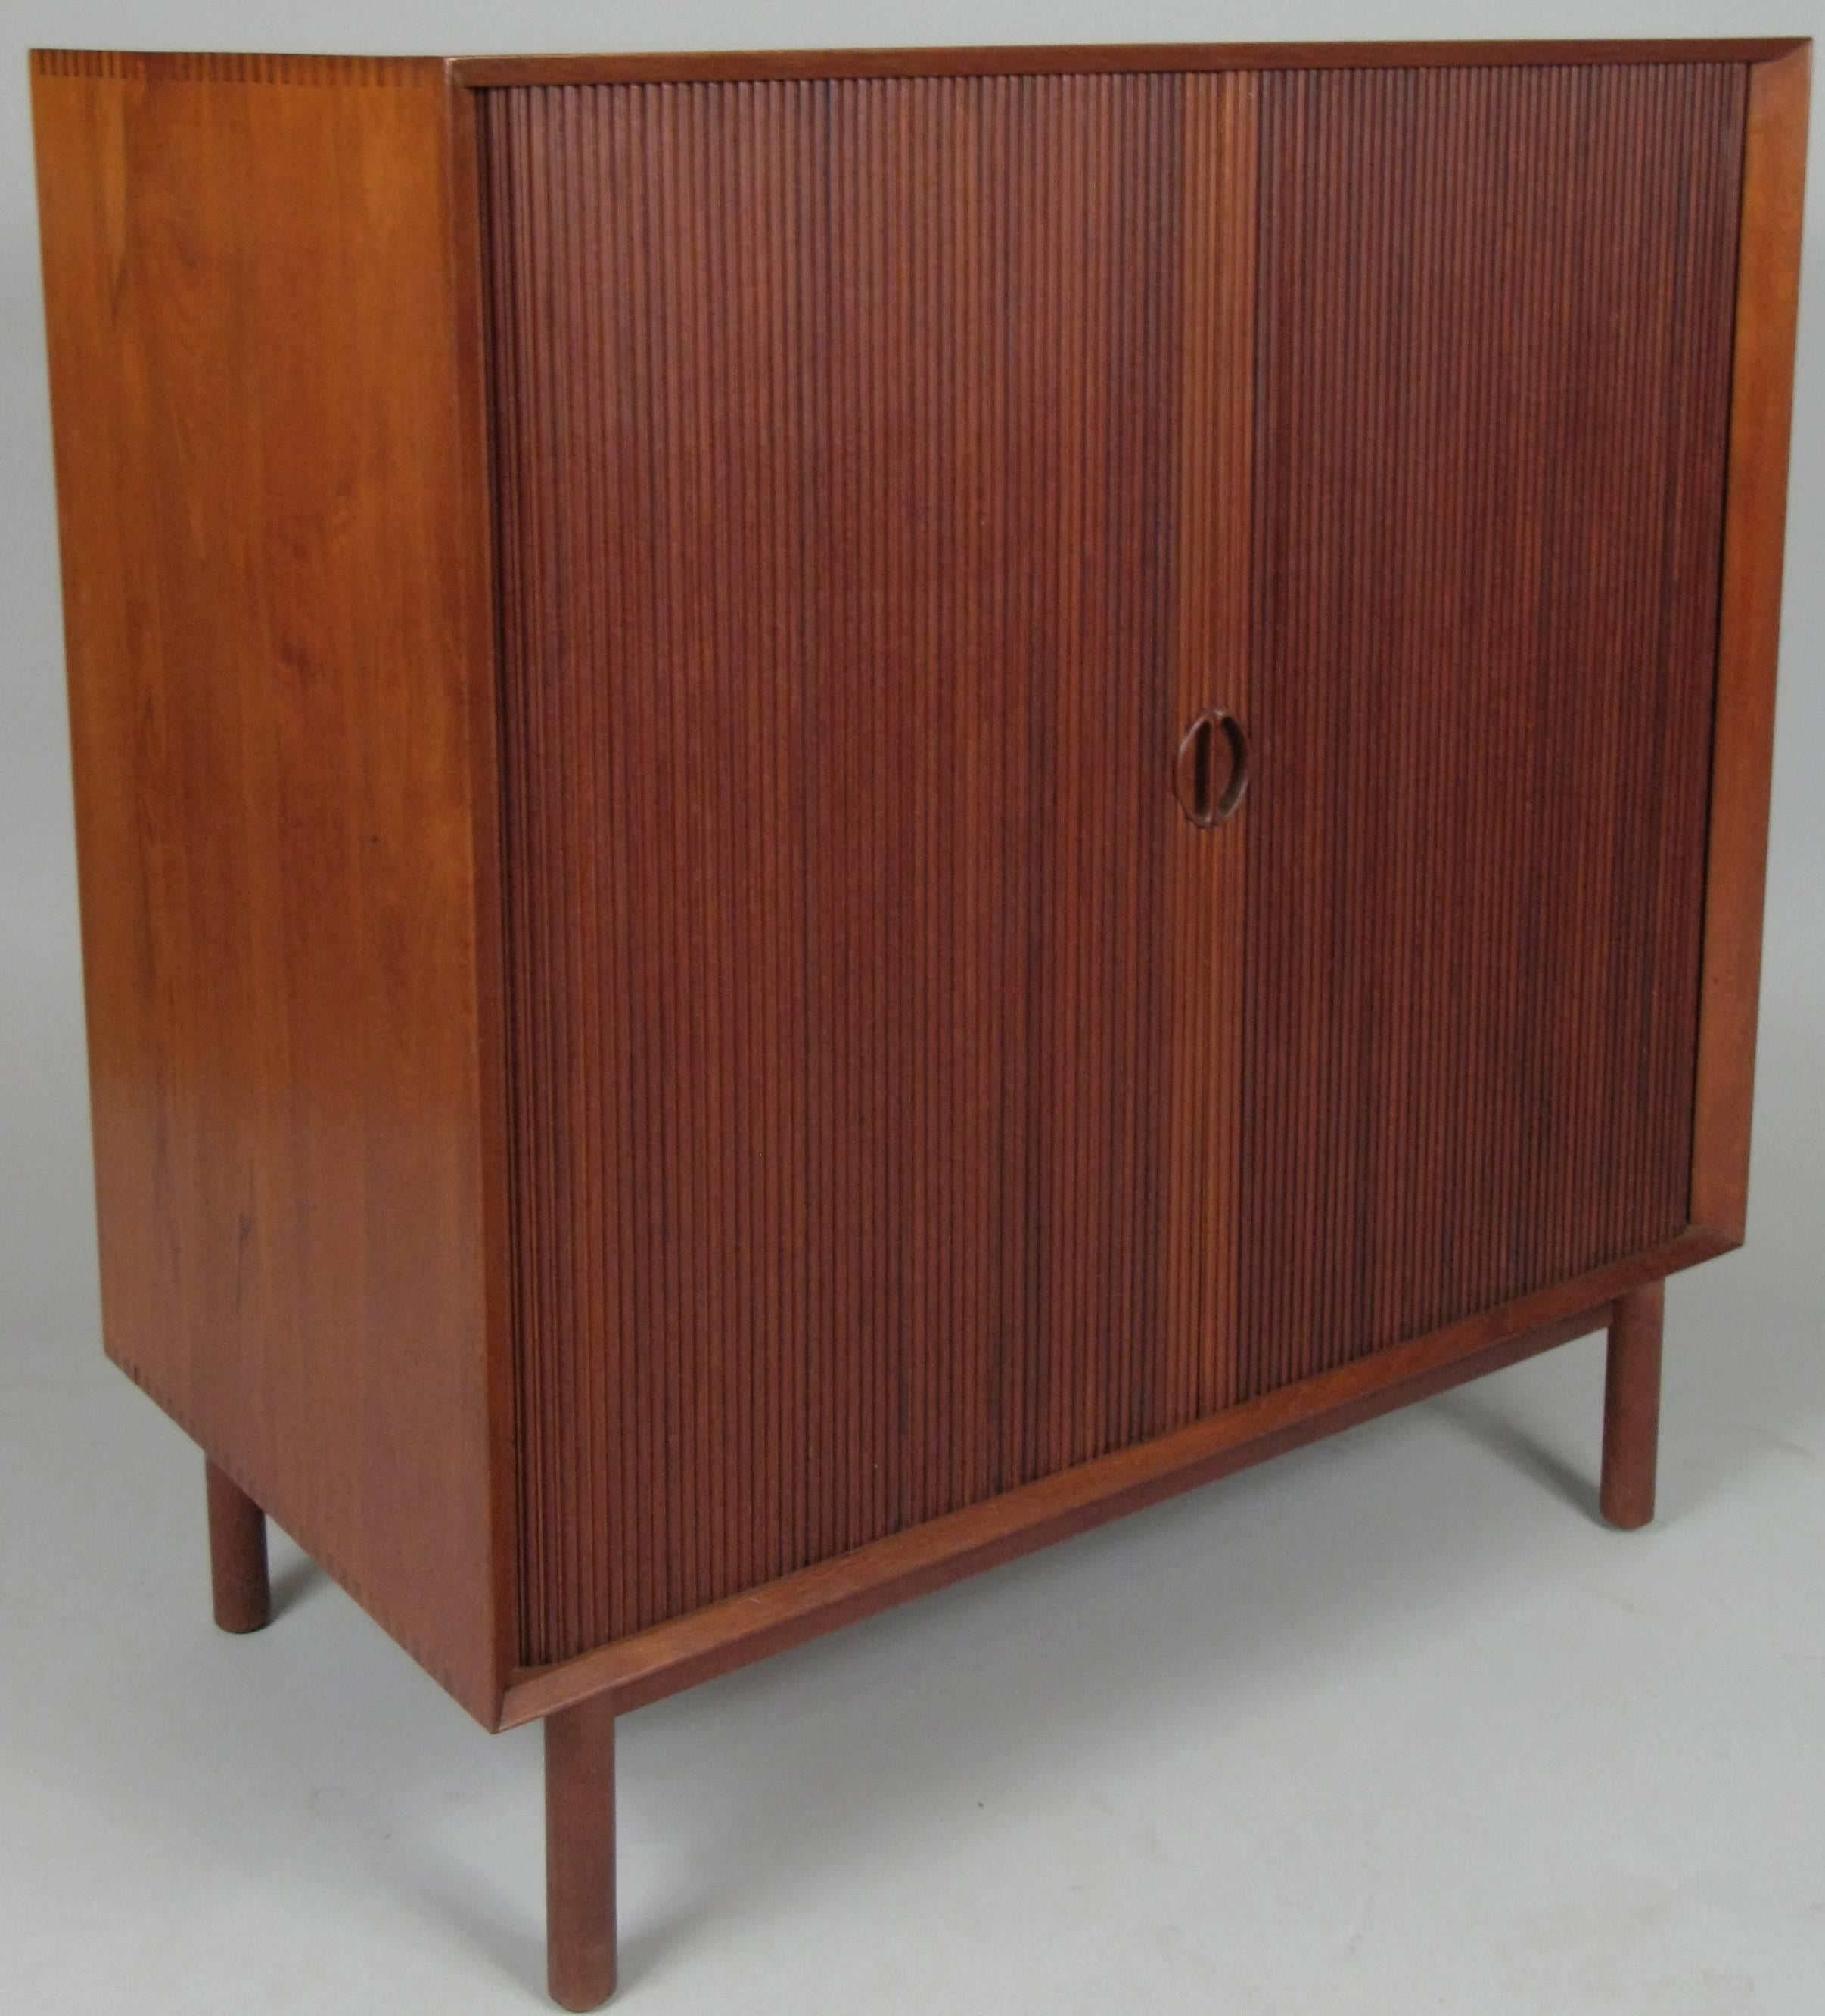 A beautiful vintage 1950s chest designed by Peter Hvidt and Orla Nielsen in solid teak, with a very nice pair of tambour doors concealing a pair of adjustable shelves. very well made and designed with dovetail joinery at the edges of the case.